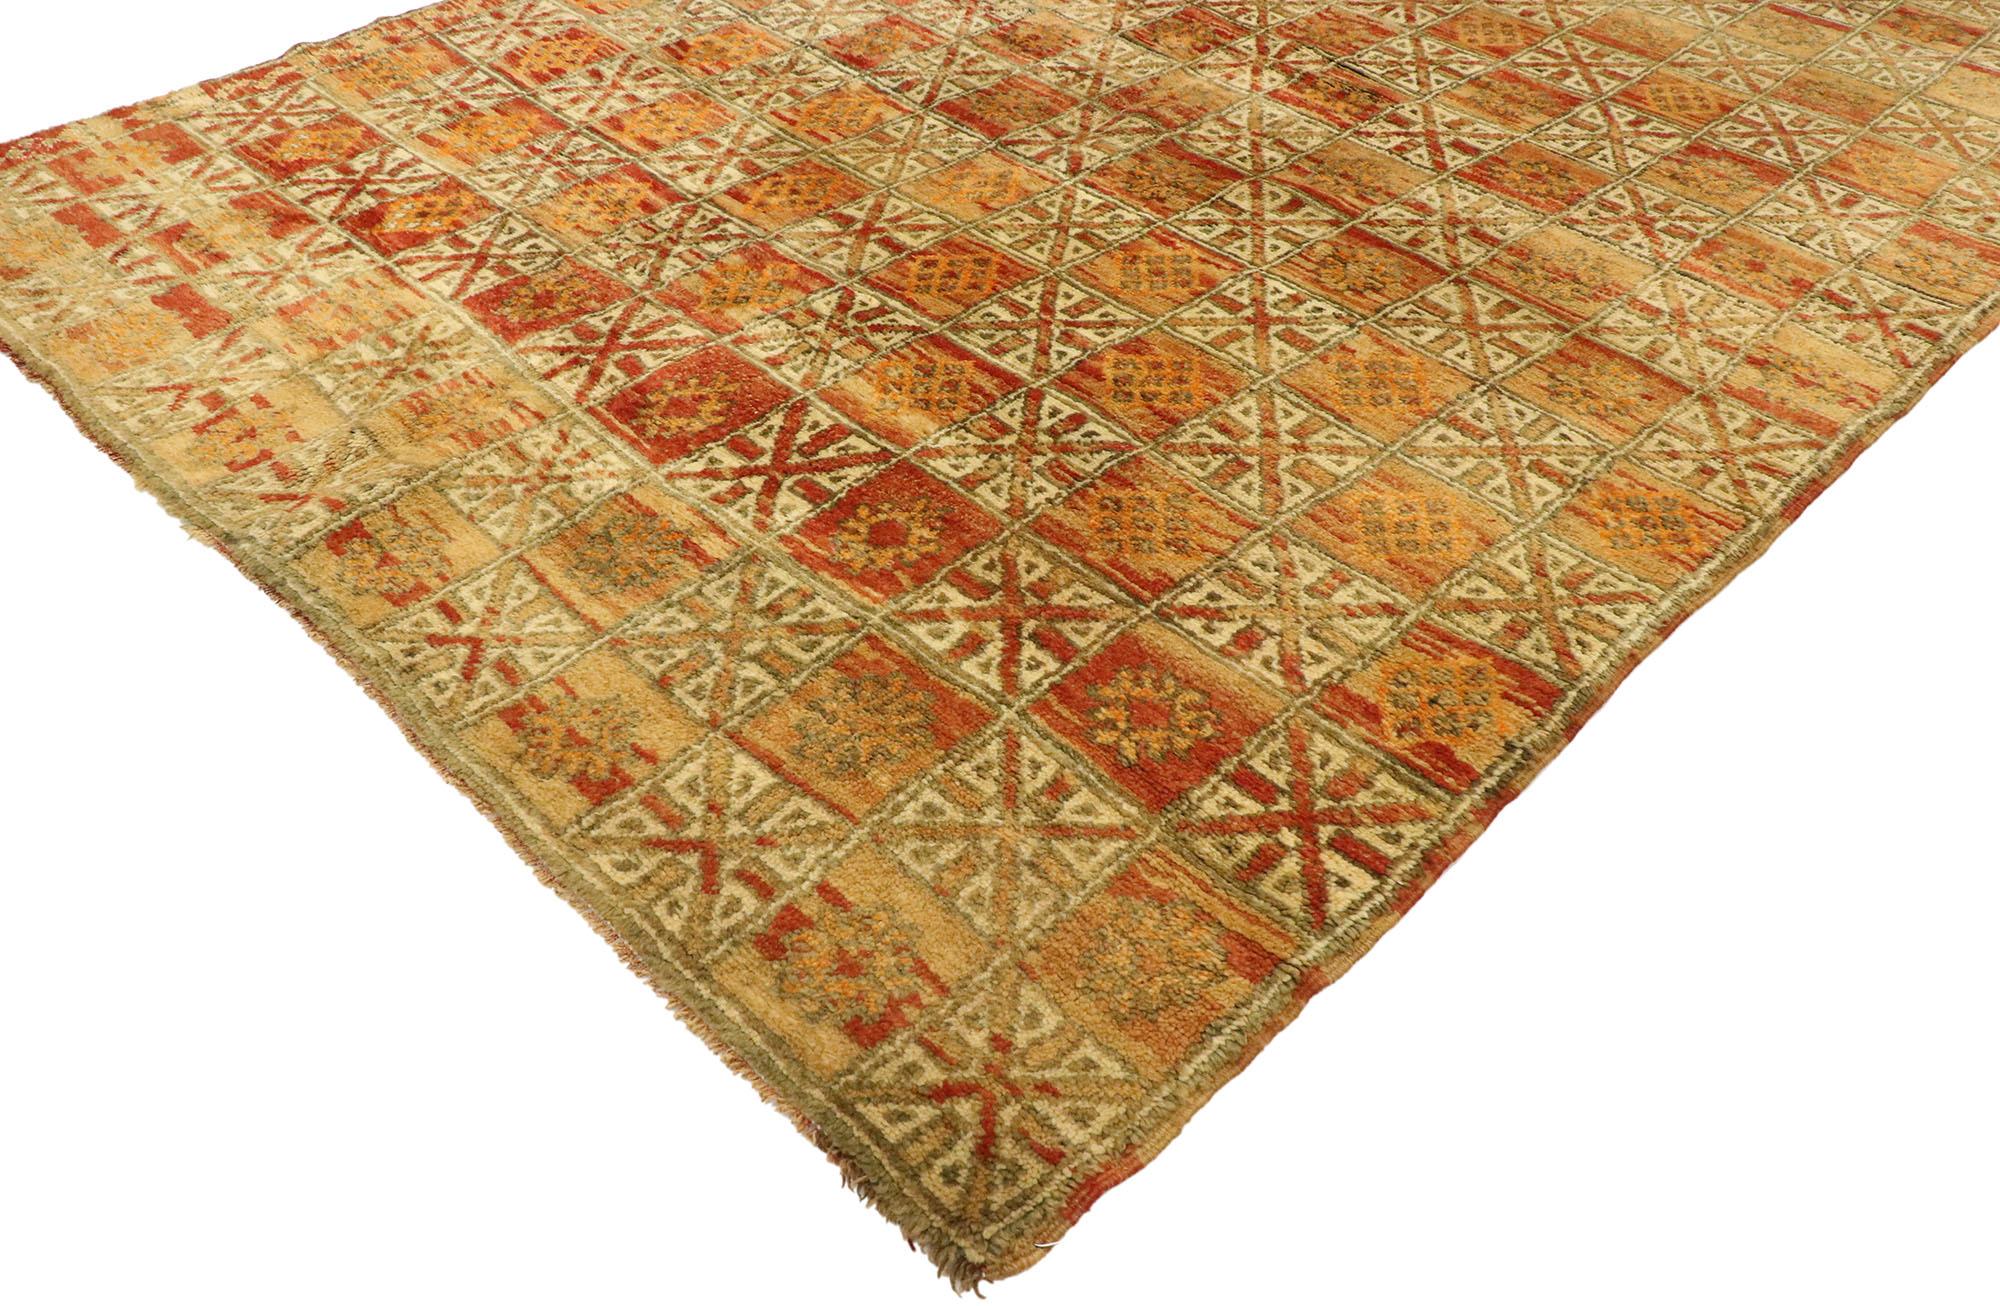 20751 Vintage Beni MGuild Moroccan Rug Runner, 05'04 x 12'10. Originating from the Beni M'Guild tribe nestled in the Middle Atlas Mountains of Morocco, Beni M'Guild rugs epitomize a revered tradition deeply woven into the fabric of Berber culture.